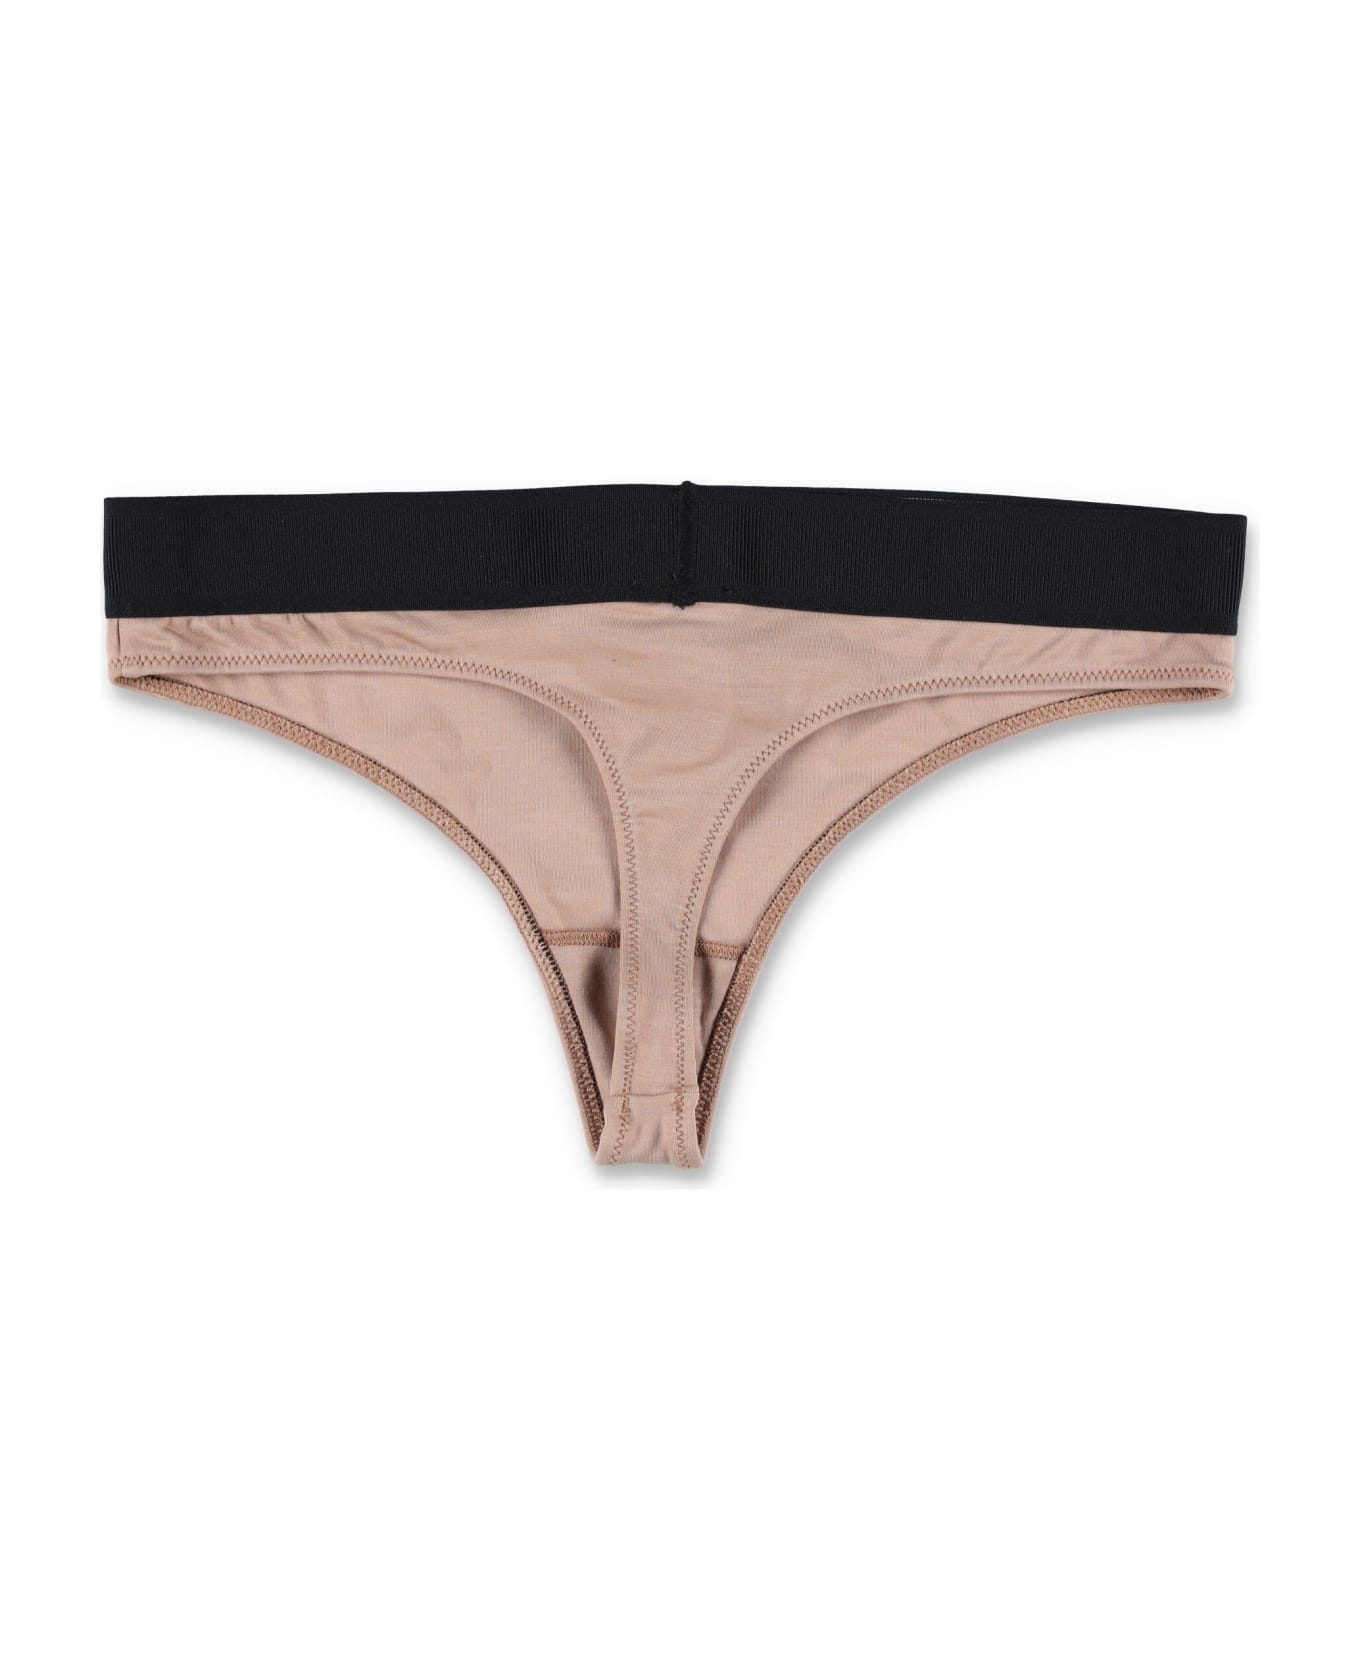 Tom Ford Brief With Logo - DUSTY ROSE ショーツ